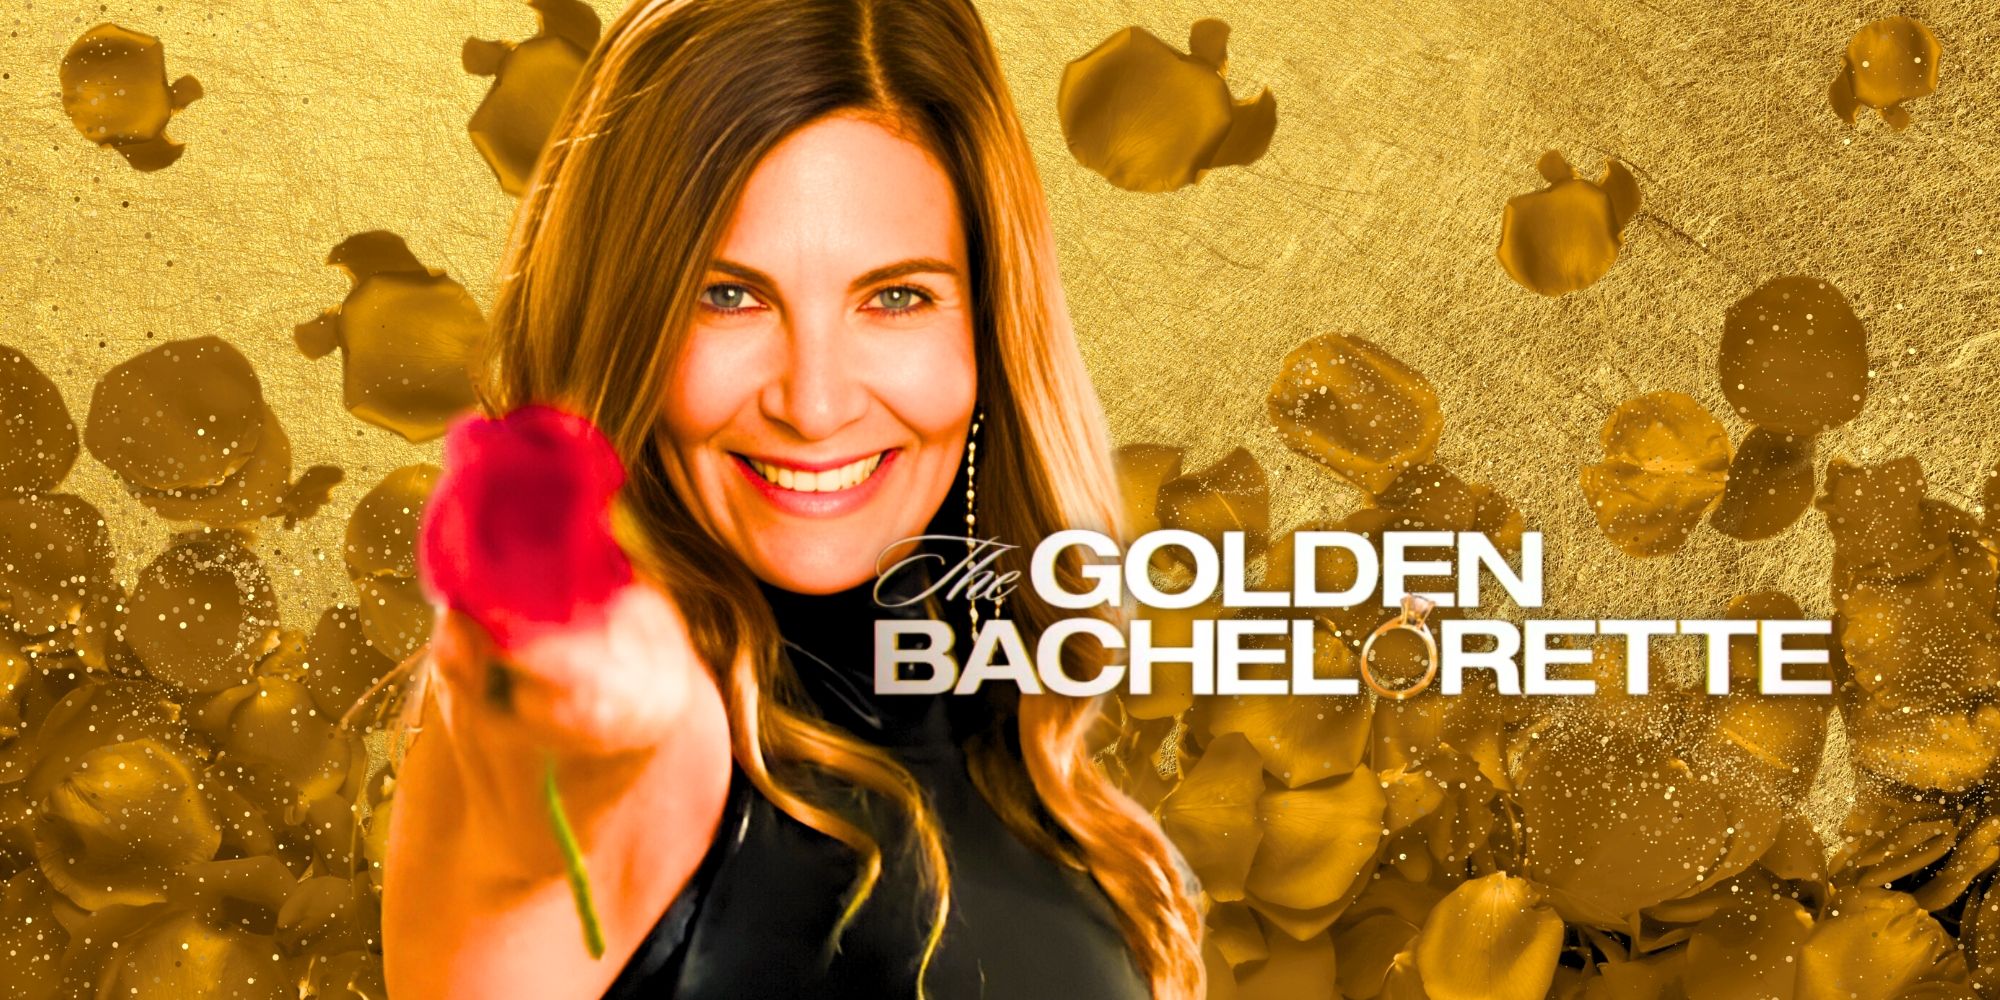 The Golden Bachelor's Leslie Fhima With The Golden Bachelorette Title & Roses